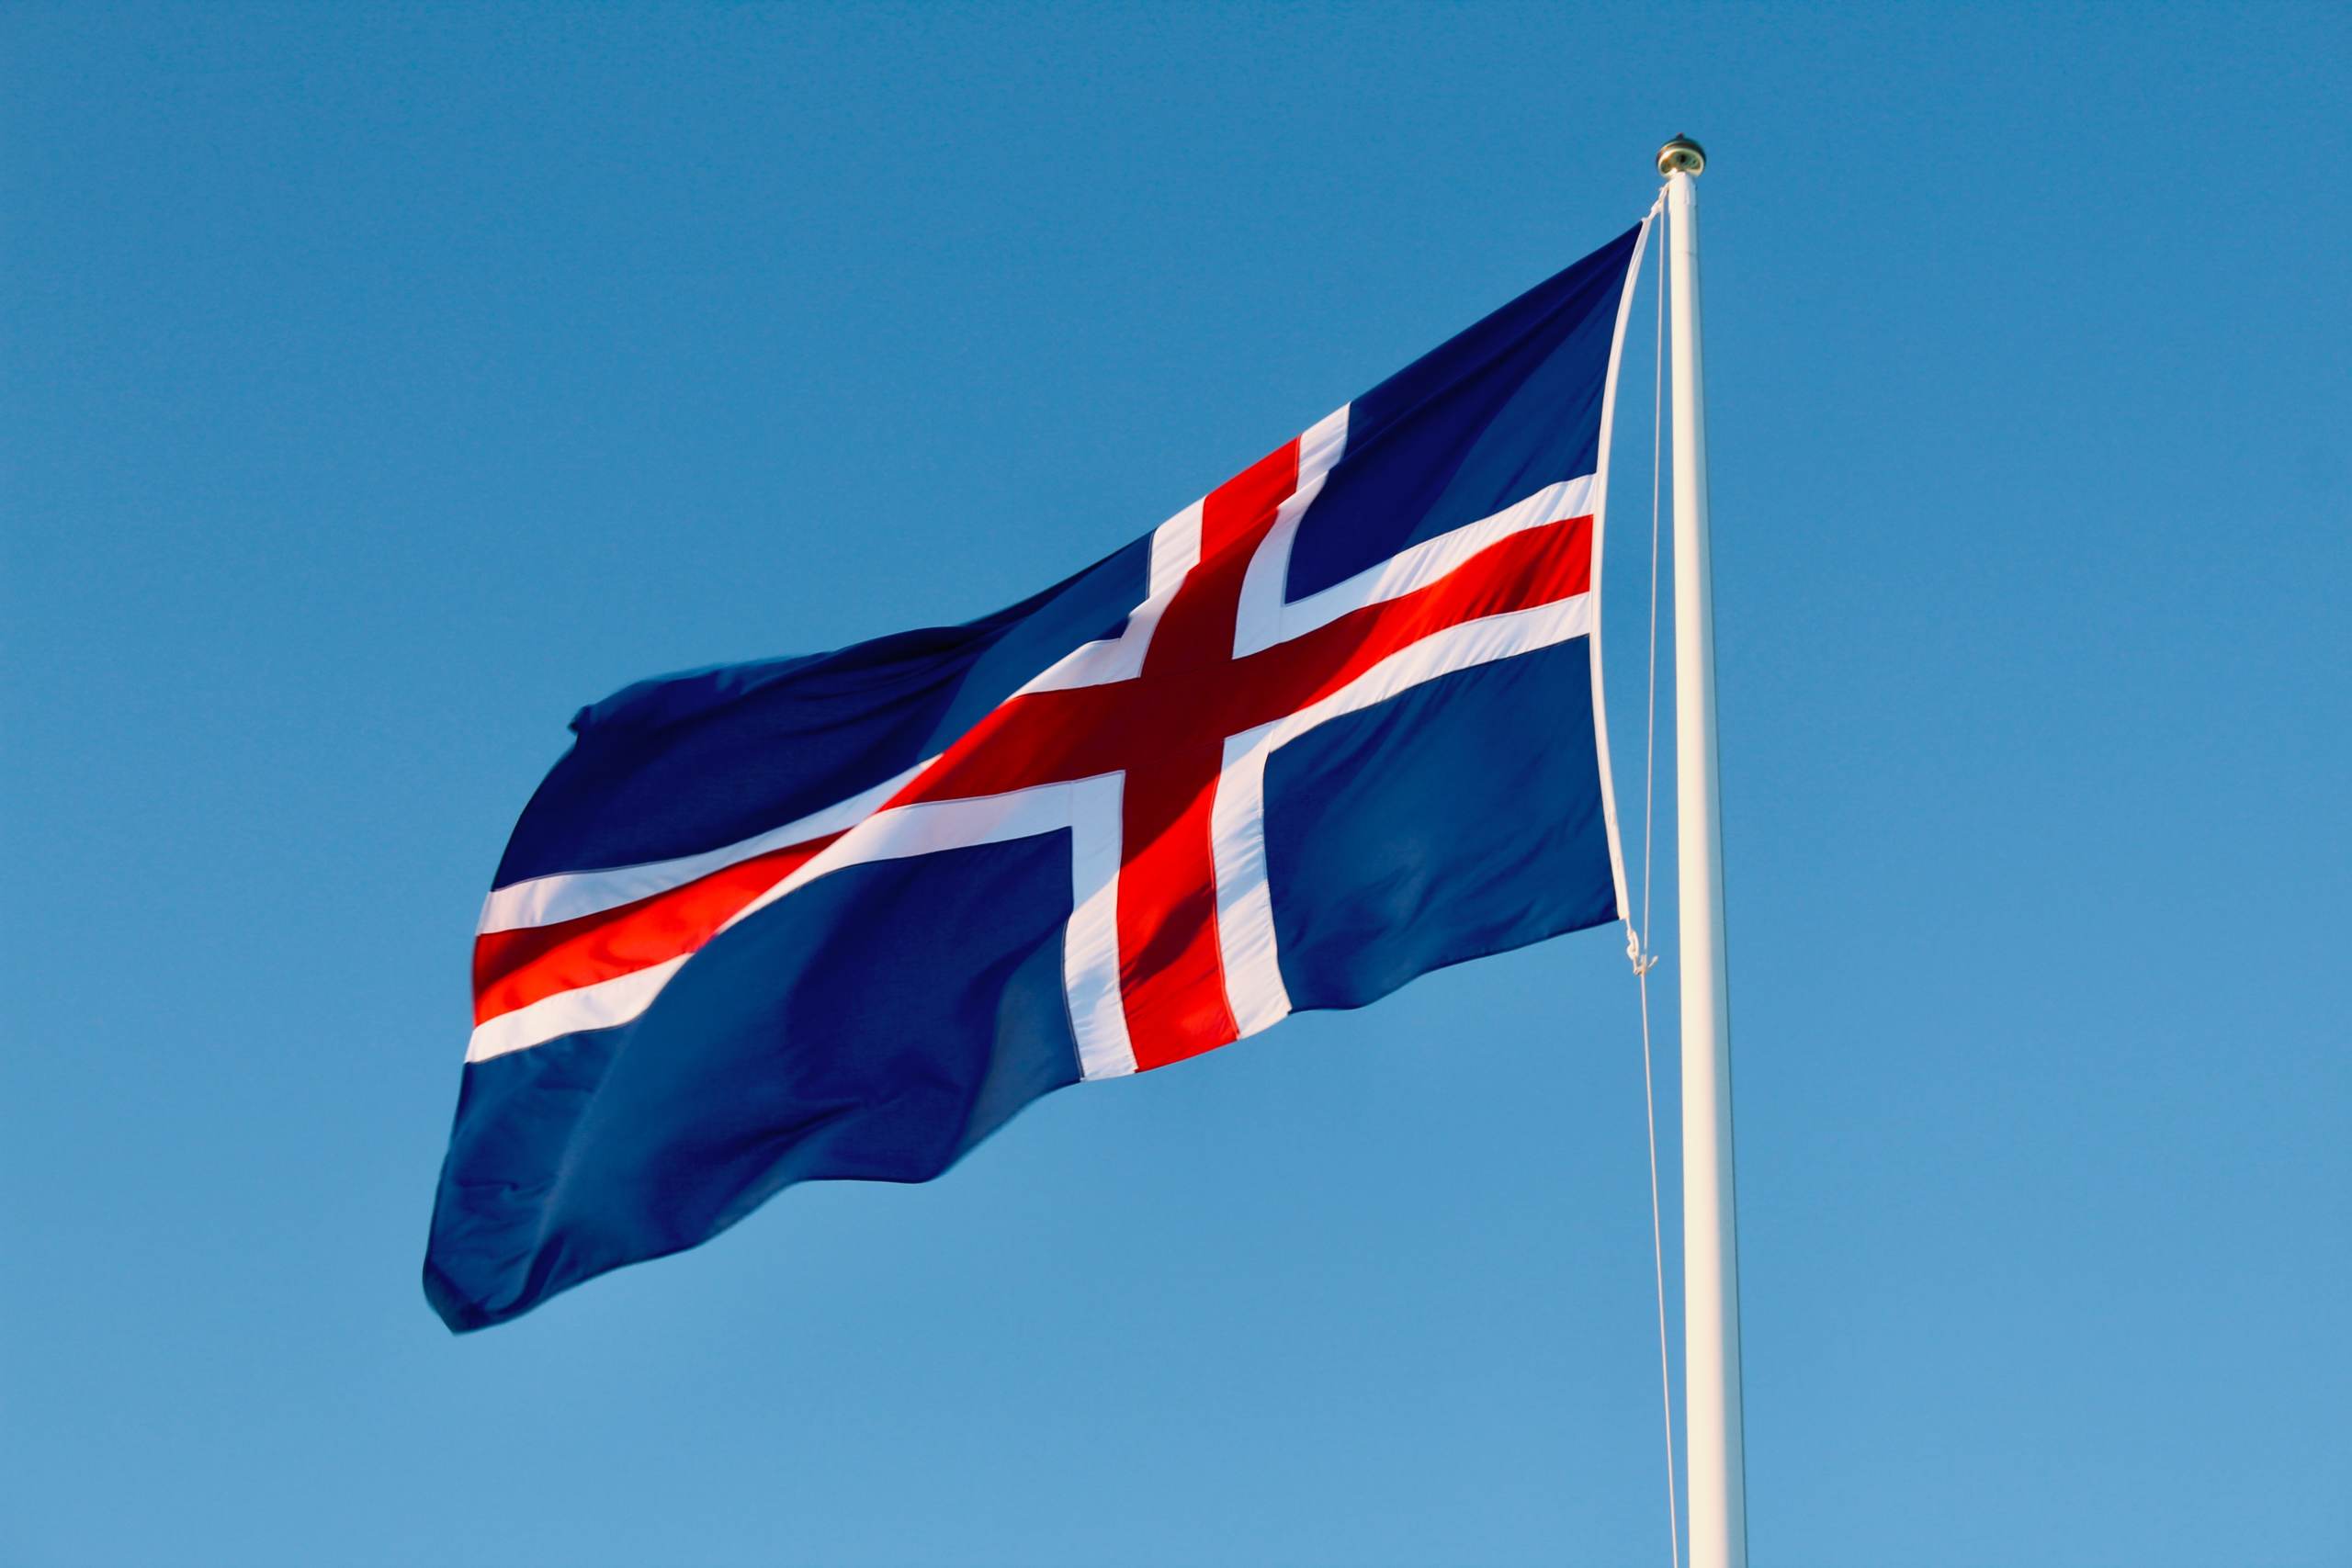  Iceland Wants ‘As Many People as Possible’ to Catch Covid-19 After Ending All Restrictions – Suggests Vaccine is Not Enough